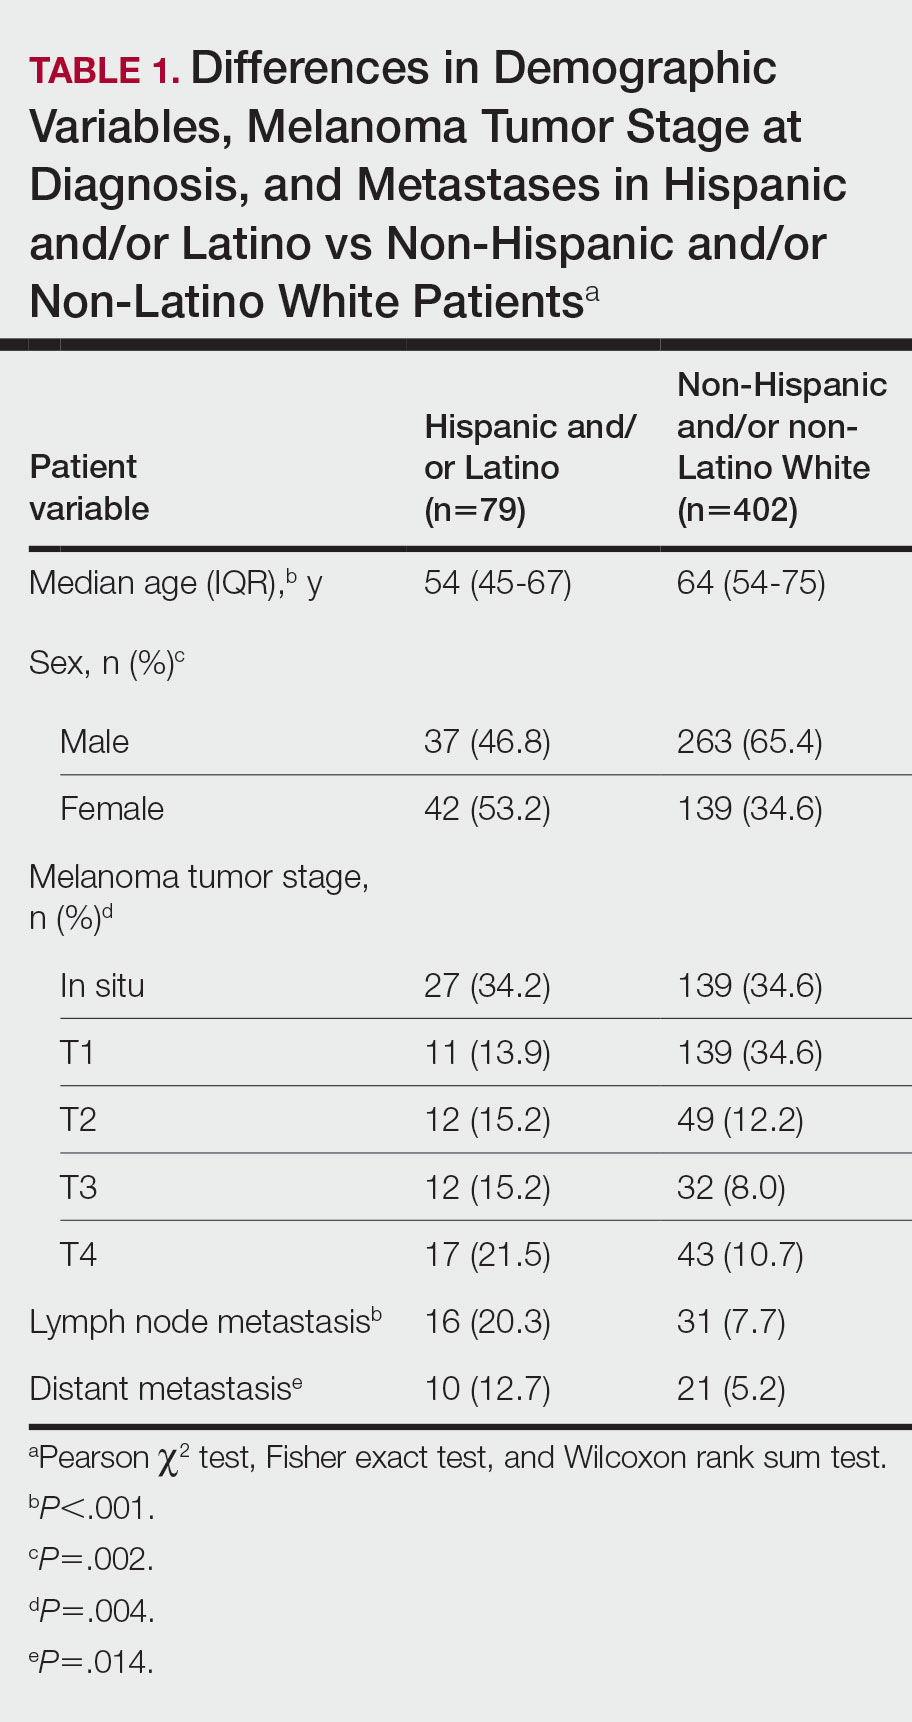 Differences in Demographic Variables, Melanoma Tumor Stage at Diagnosis, and Metastases in Hispanic and/or Latino vs Non-Hispanic and/or Non-Latino White Patients